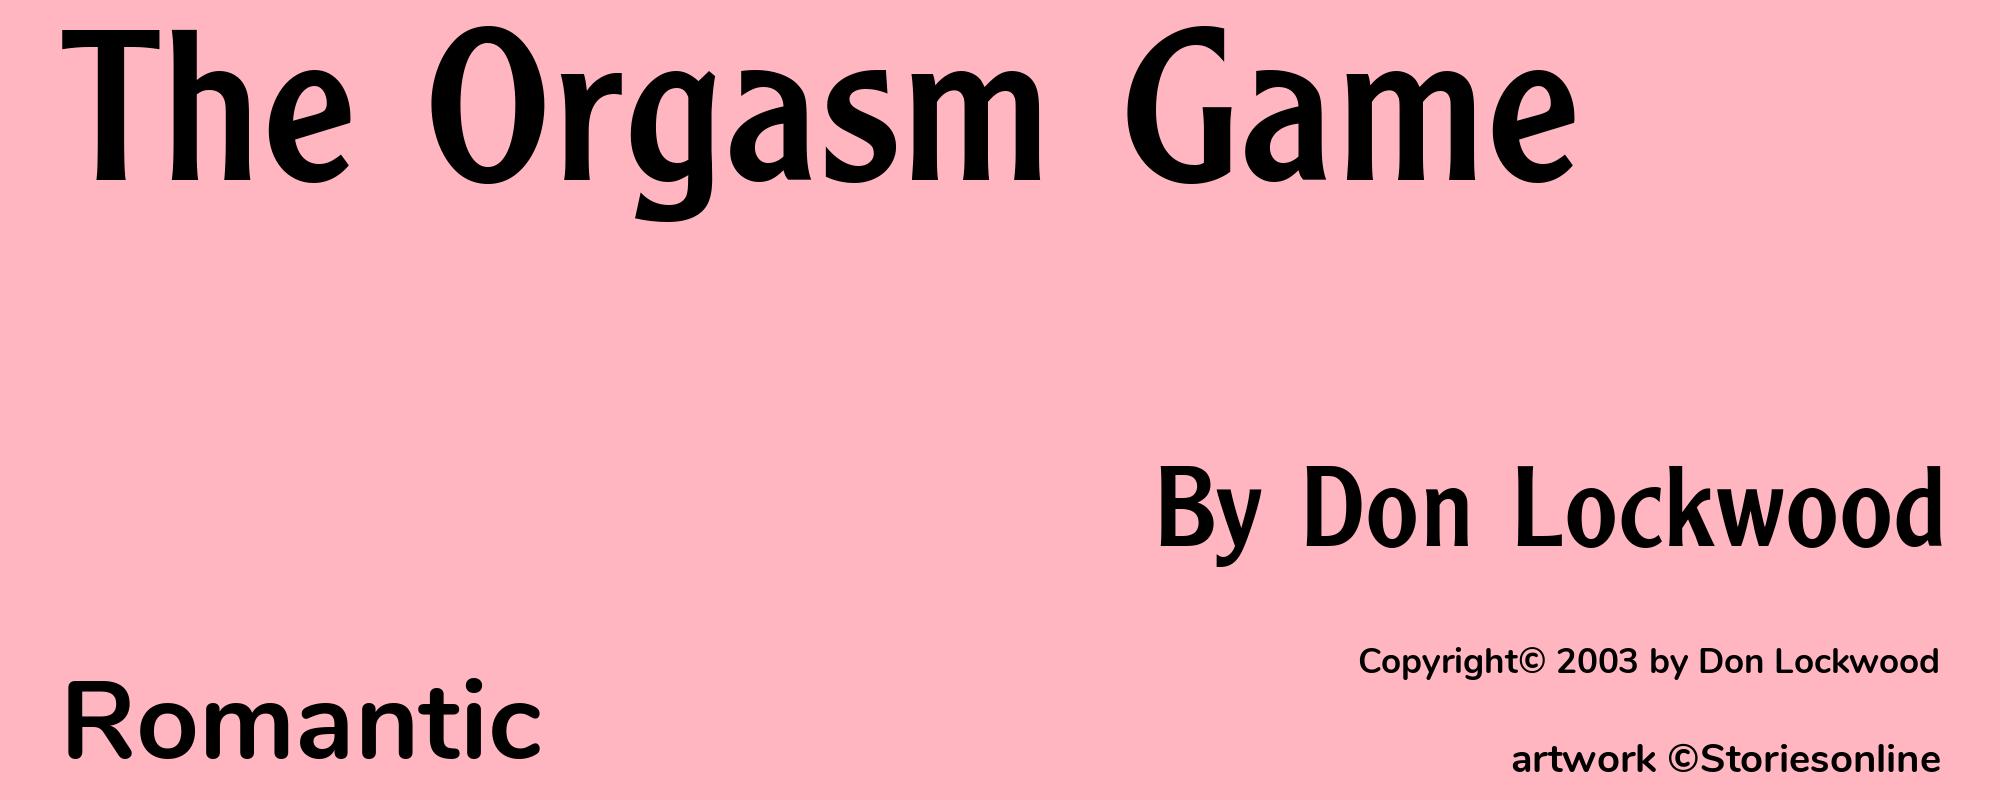 The Orgasm Game - Cover